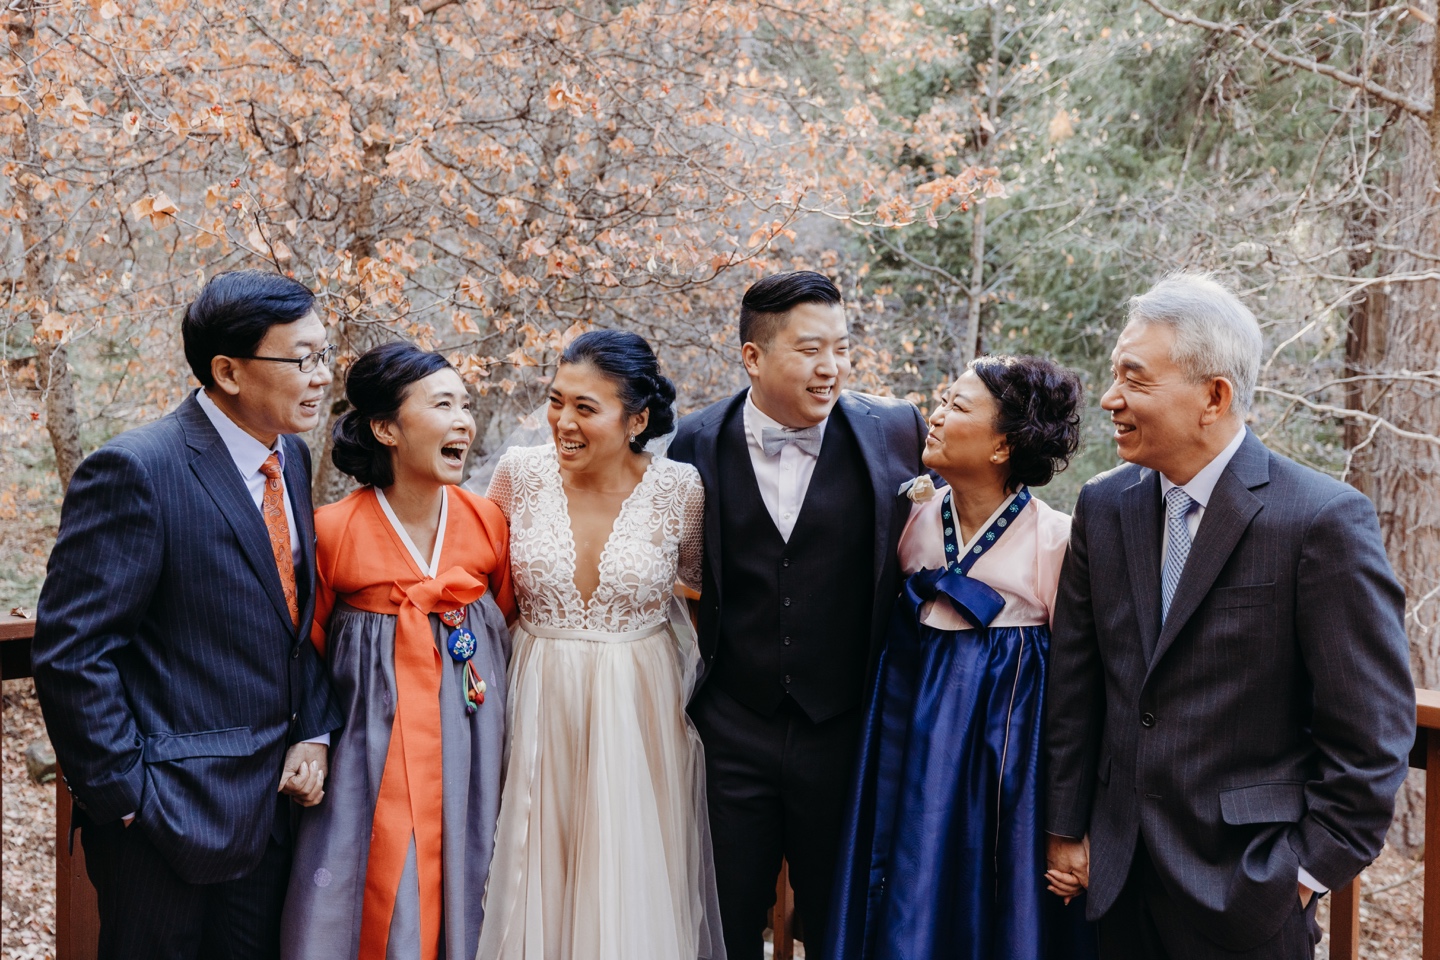 The entire family with the bride and groom laugh together before their Yosemite wedding.